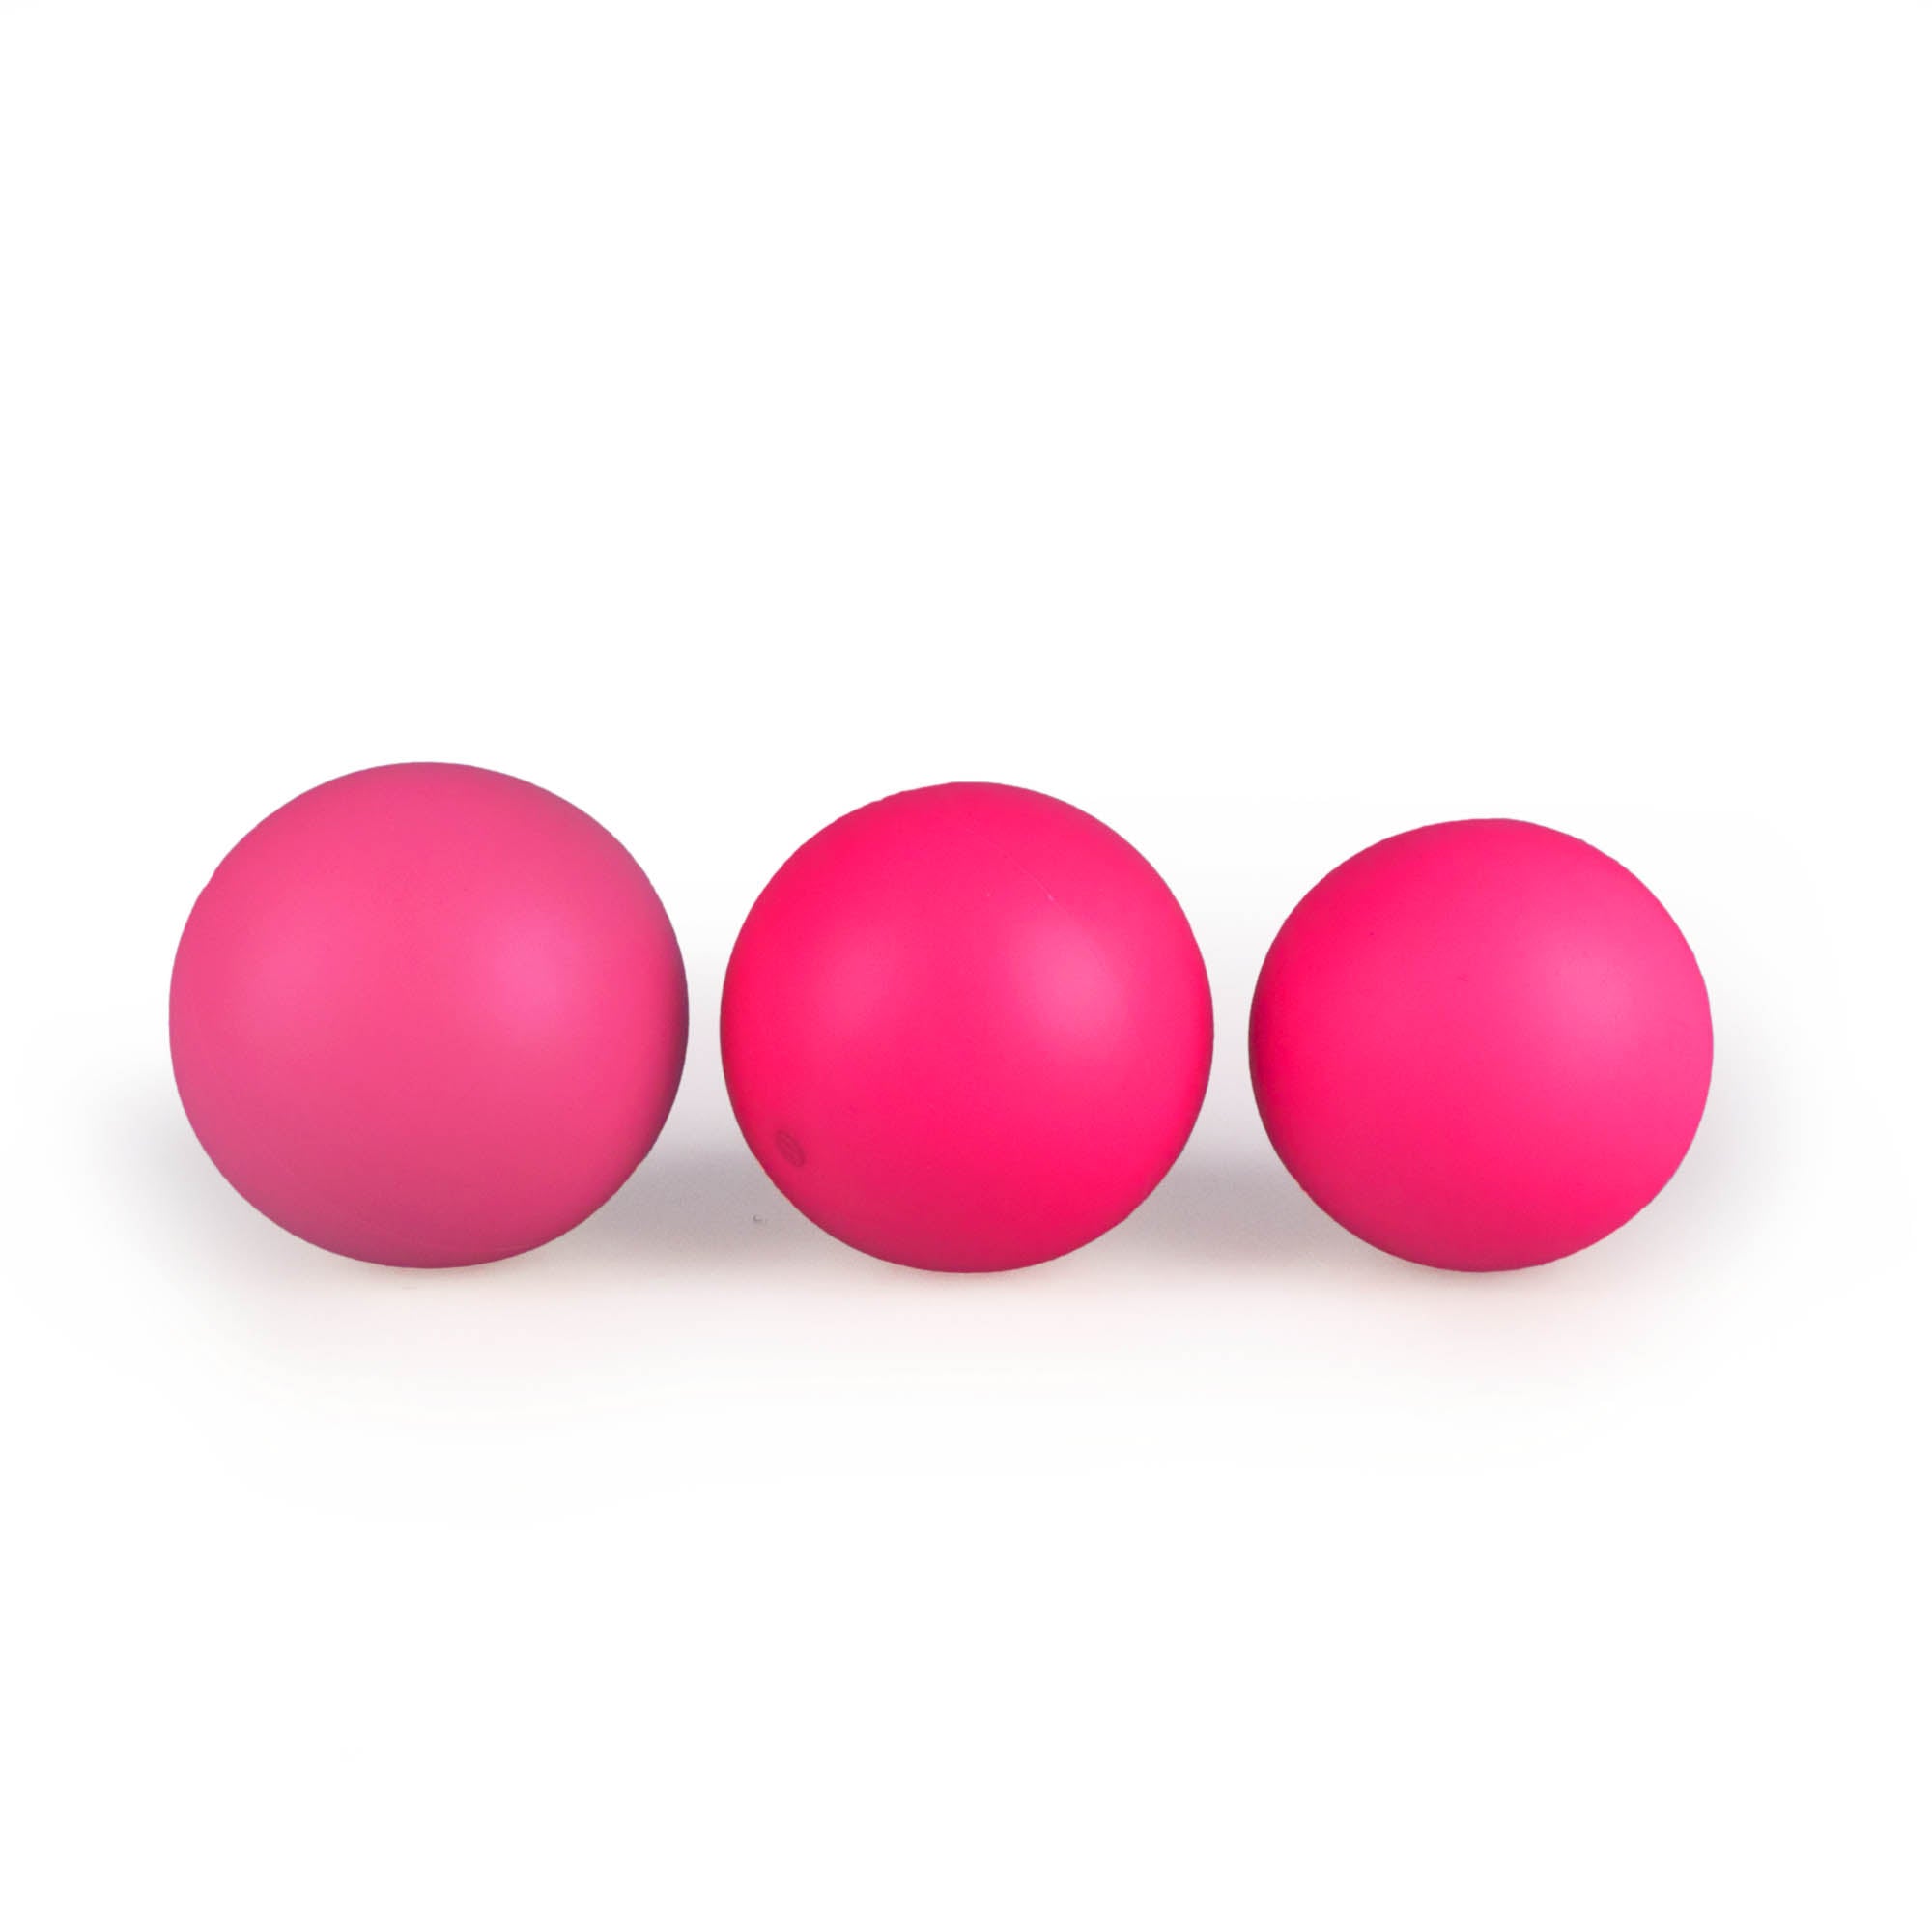 MMX juggling ball comparison in pink